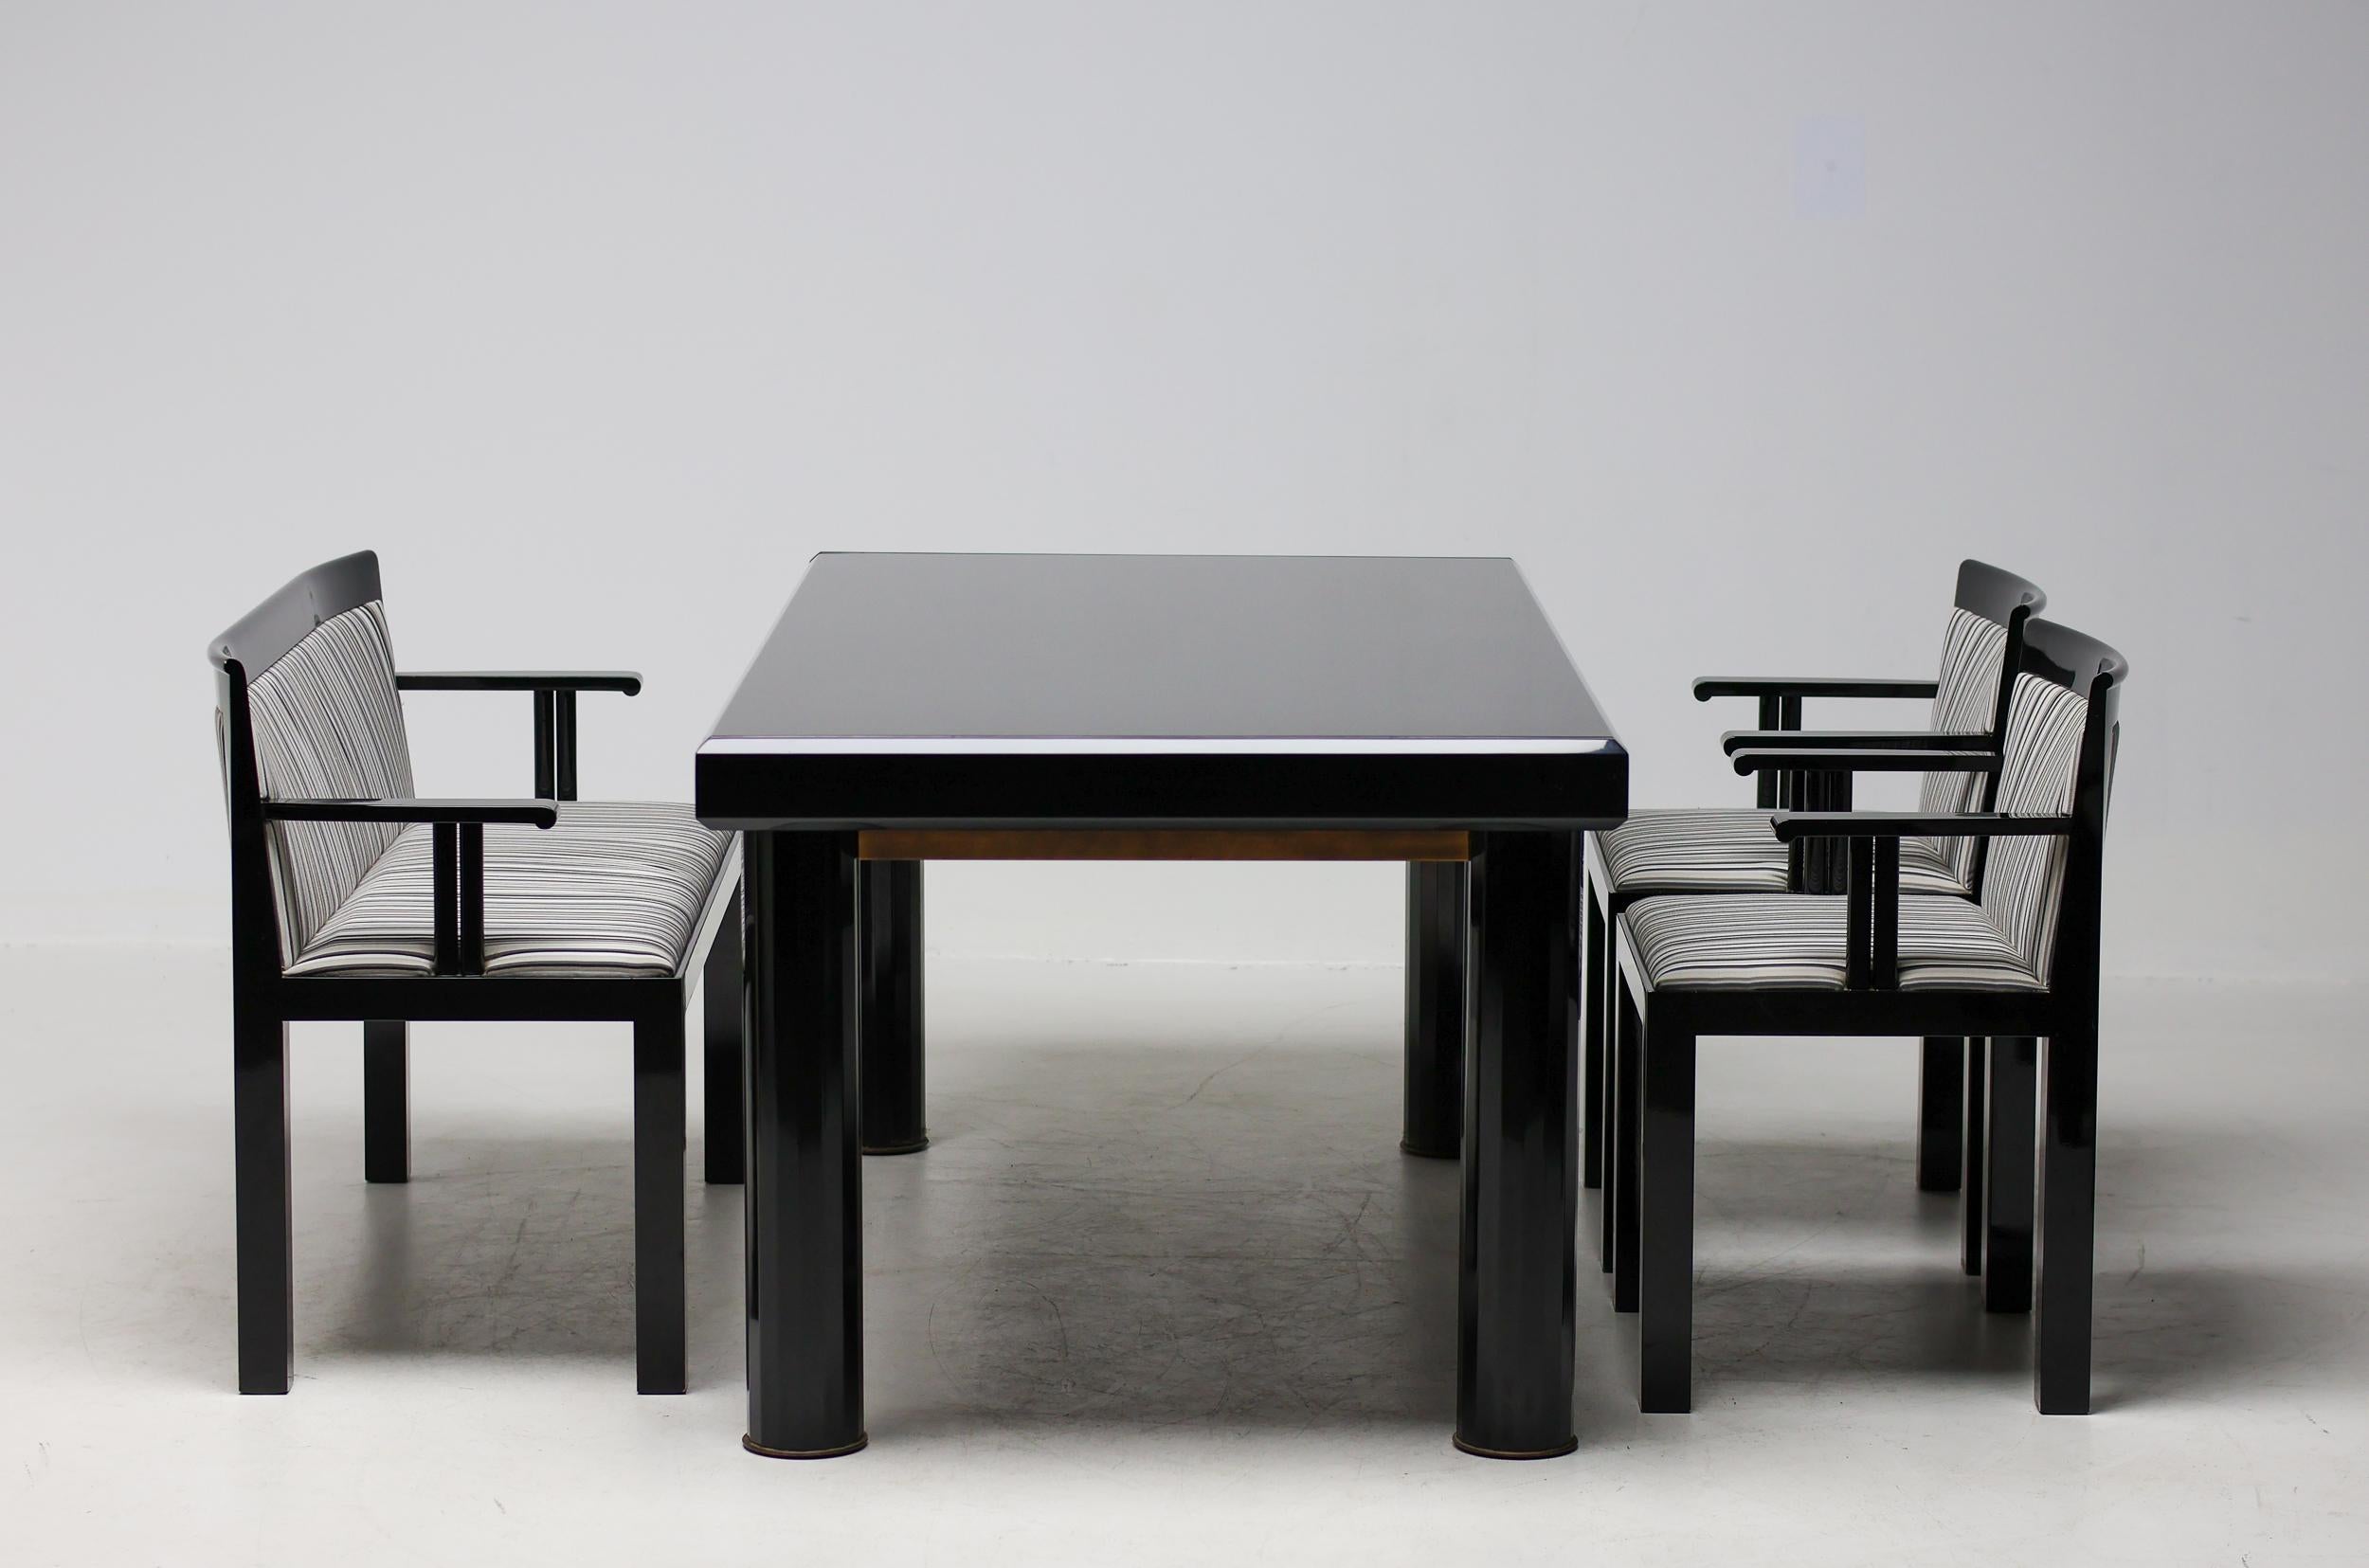 Exceptional Post-Modern Teatro dining set designed by architect Aldo rossi and Luca Meda and produced by Italian furniture company Molteni.  Beautiful timeless design in high quality gloss lacquered wood and original fabric upholstery in exceptional